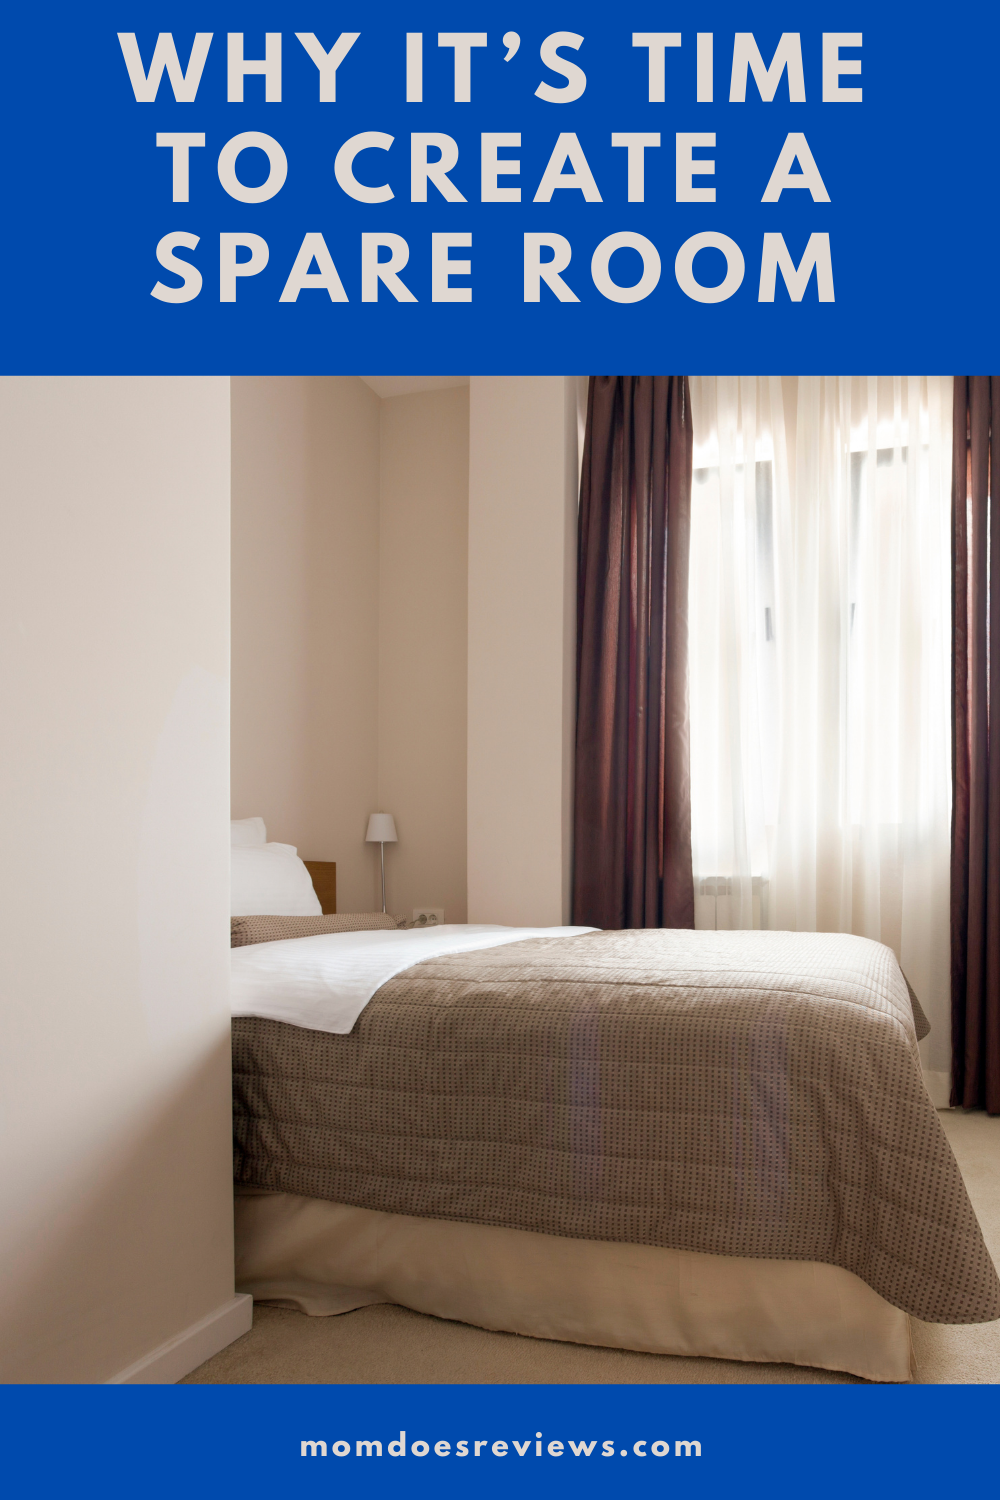 Why It’s Time To Create a Spare Room